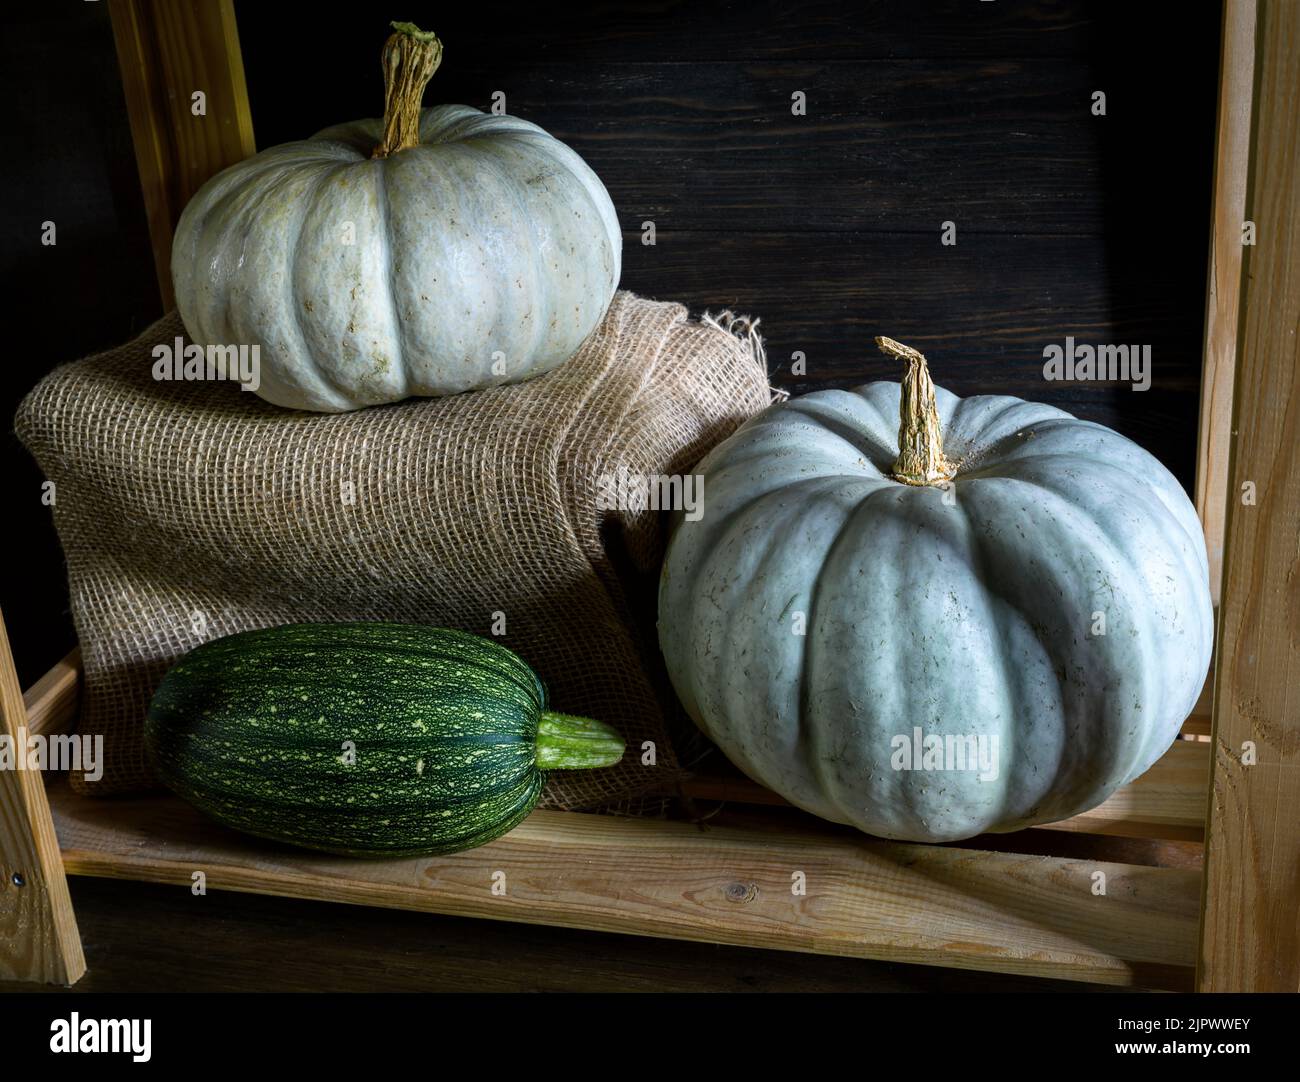 Vegetable marrow and pumpkins on kitchen wood shelves. Vintage still life of food. Photography of zucchini and white pumpkins in rustic interior. Conc Stock Photo